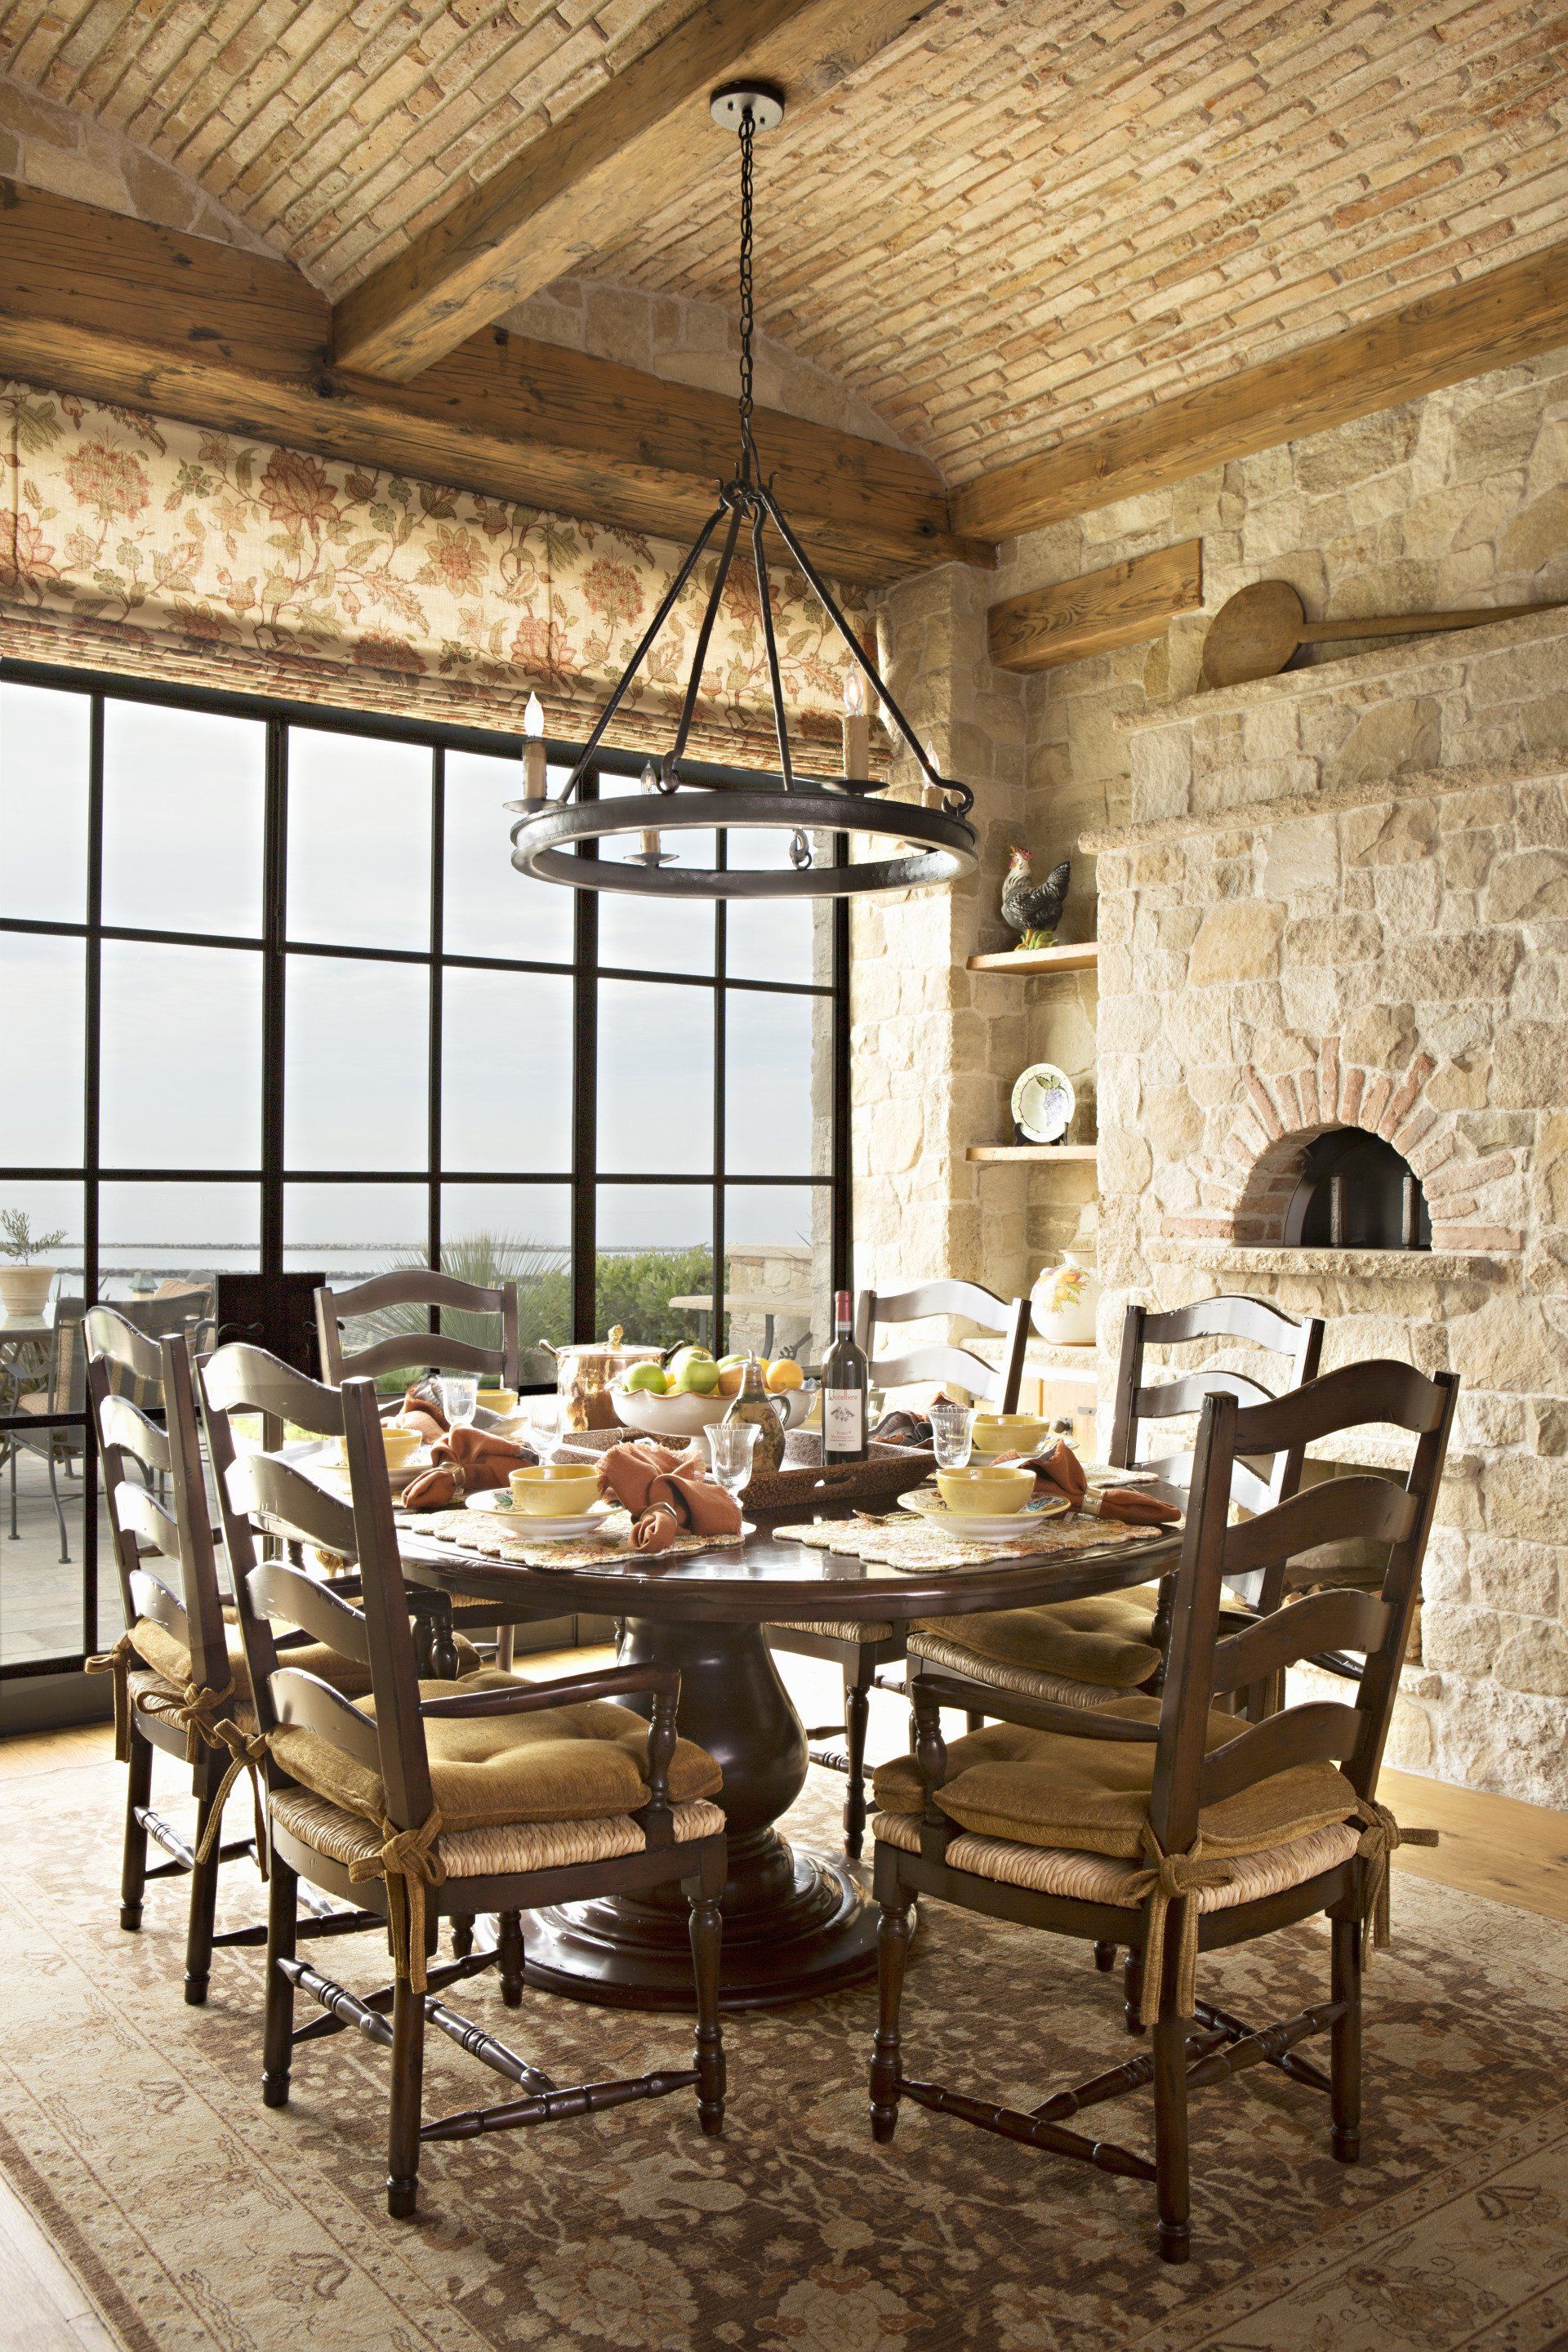 Dining room in a Tuscan stone villa in Corona Del Mar designed by Oatman Architects